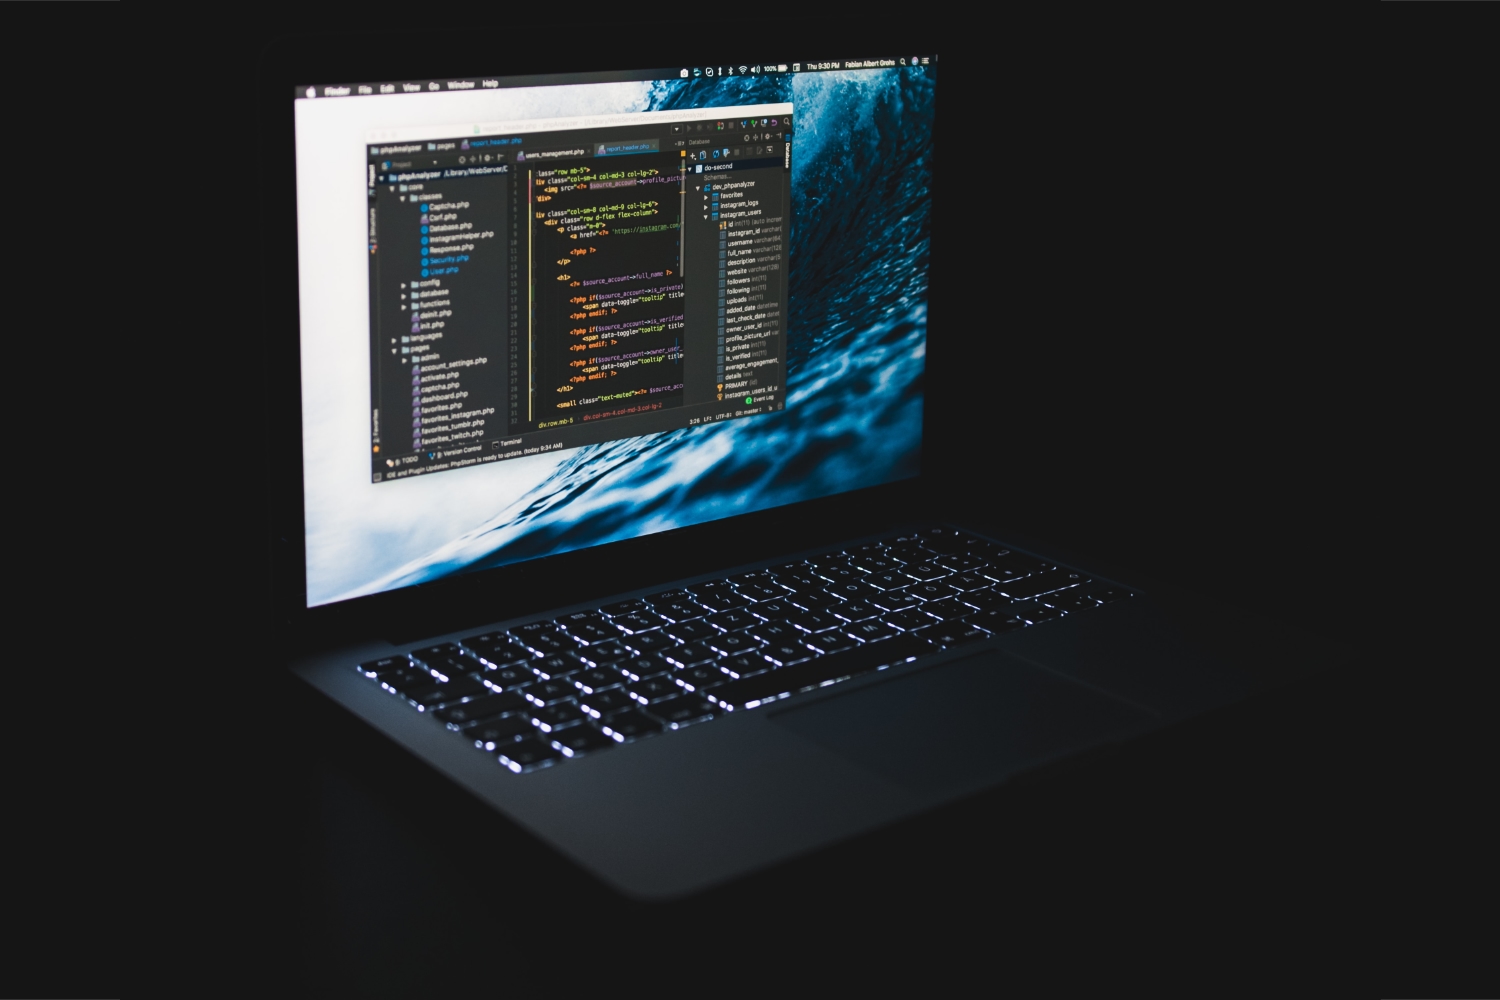 Patched Mac malware sheds light on scary backdoor for hackers